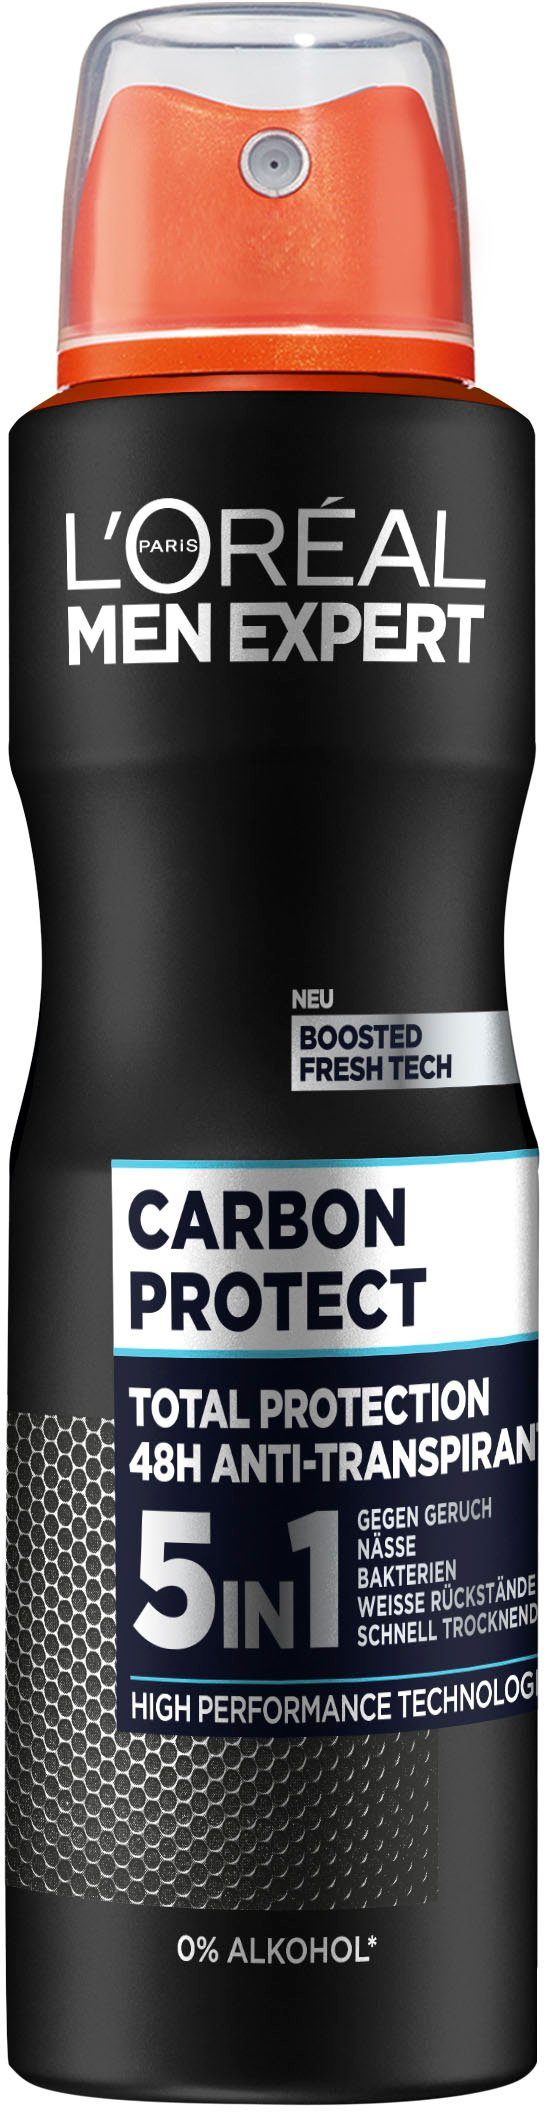 L'ORÉAL PARIS MEN Carbon 6-tlg. 5-in-1, Protect Spray EXPERT Deo Packung, Deo-Spray